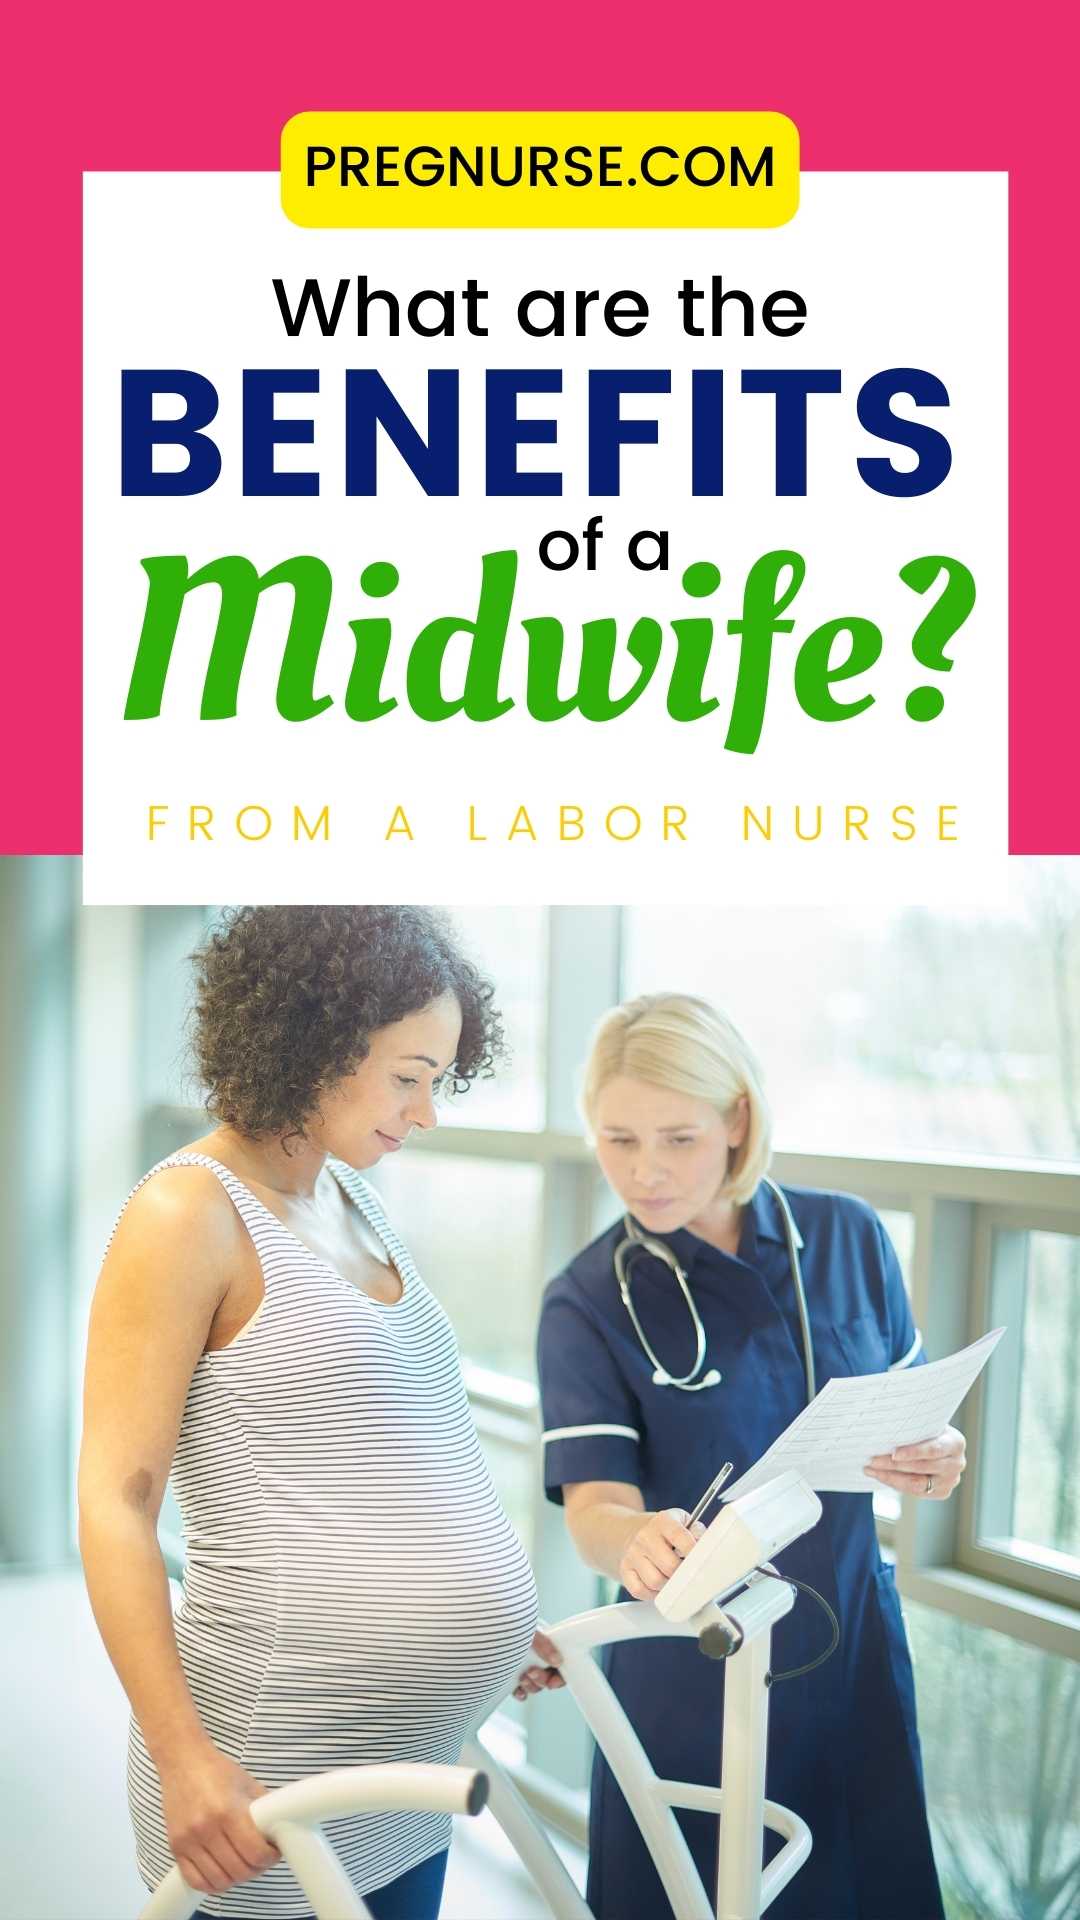 There are many benefits to choosing a midwife as your prenatal care provider. From more personalized care to more natural approaches to childbirth, midwives can provide the support and guidance expectant mothers need during this important time in their lives. If you are pregnant, or are thinking of becoming pregnant, it is worth considering a midwife as your primary healthcare provider.